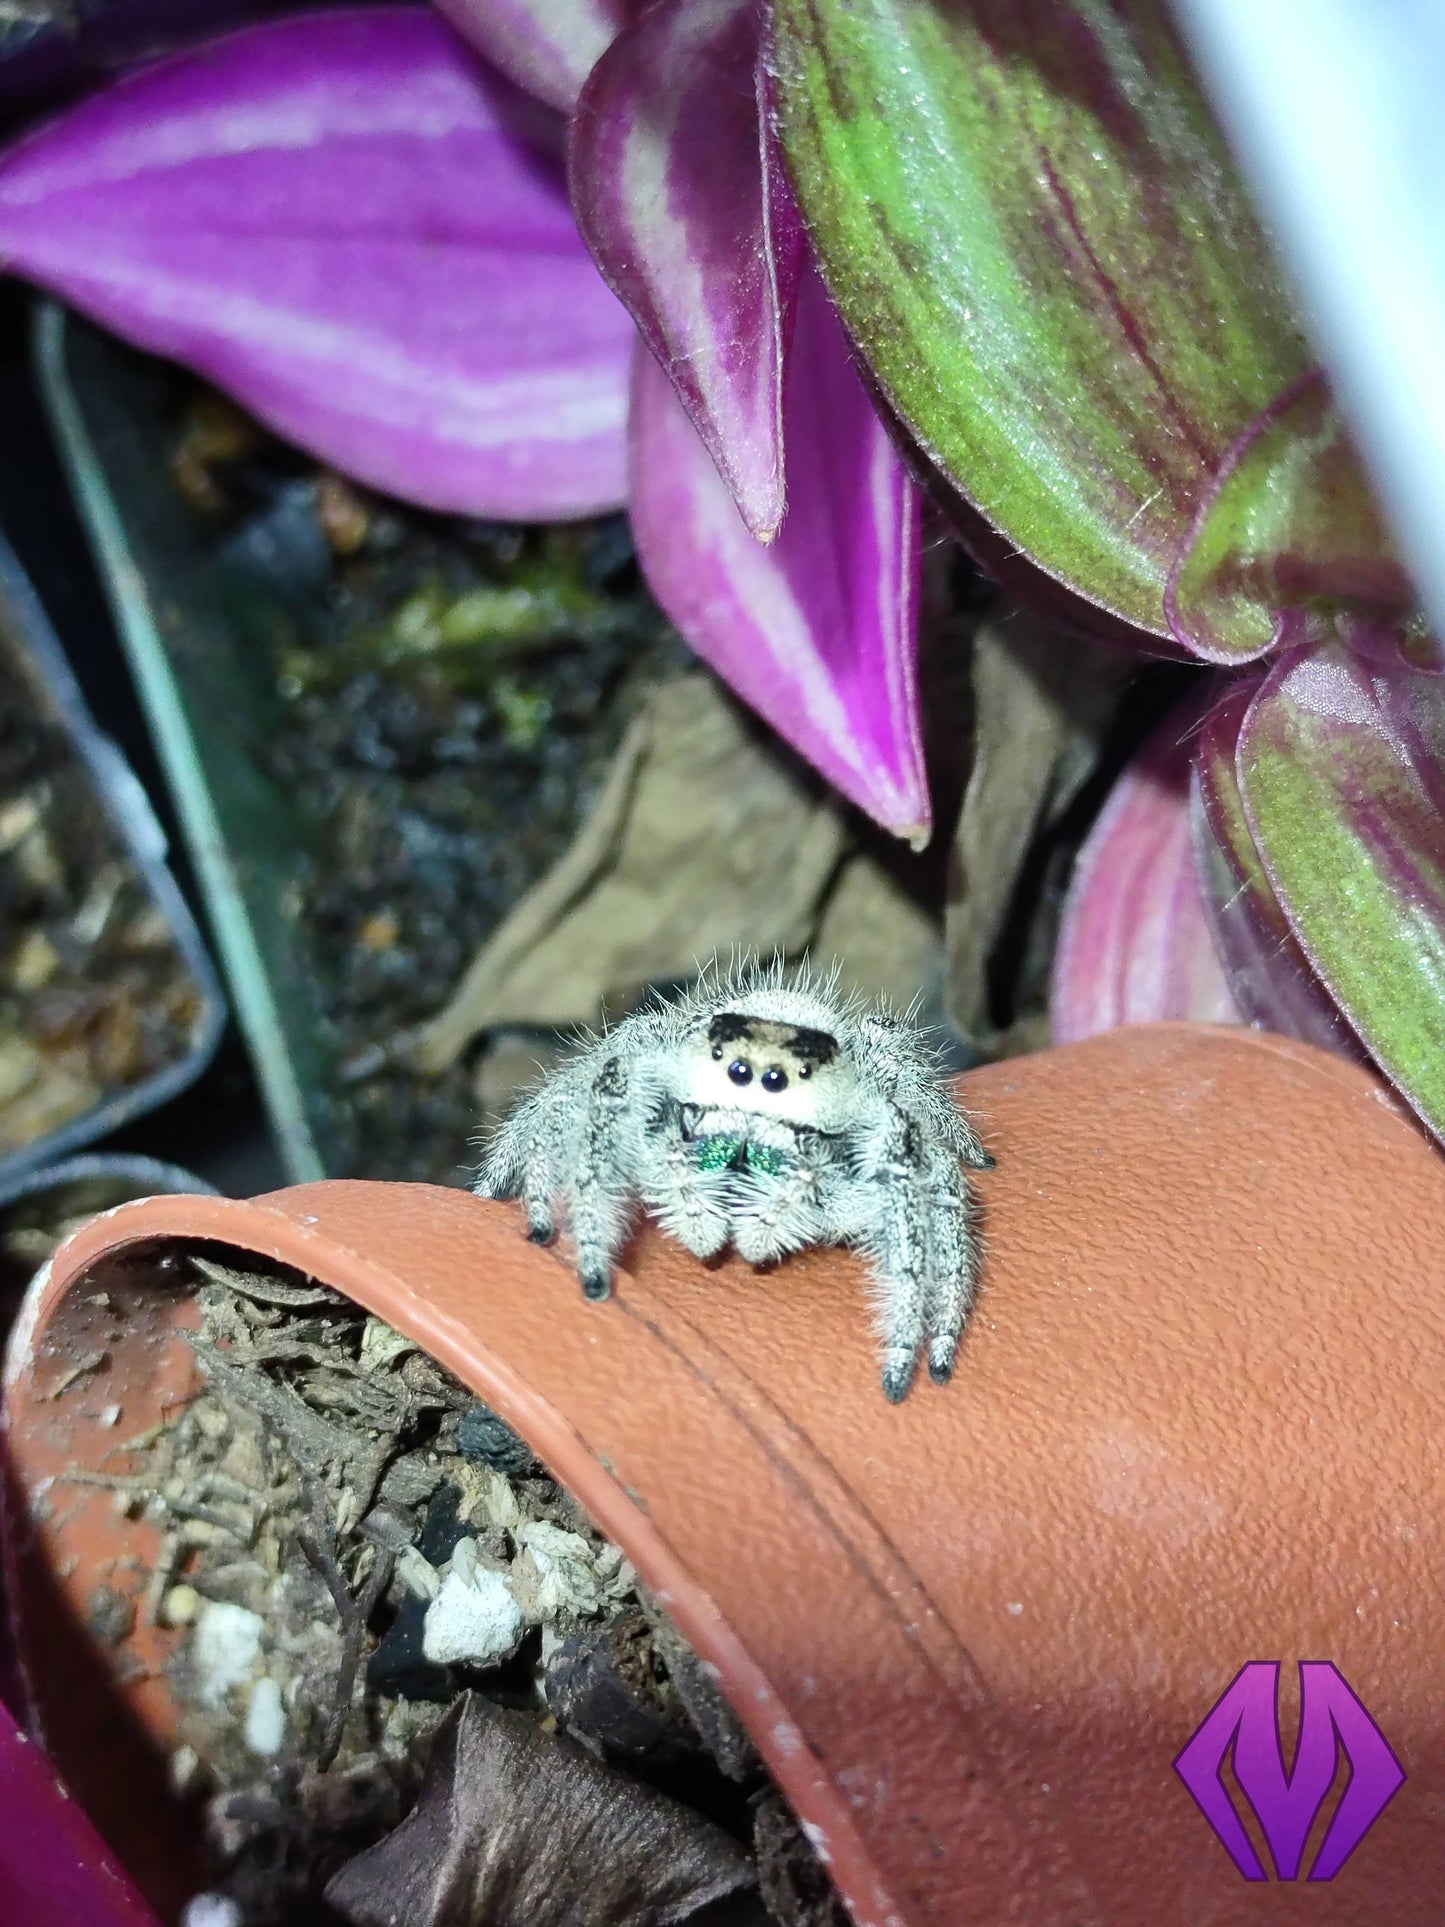 regal jumping spider 5i+ GREEN chelicerae